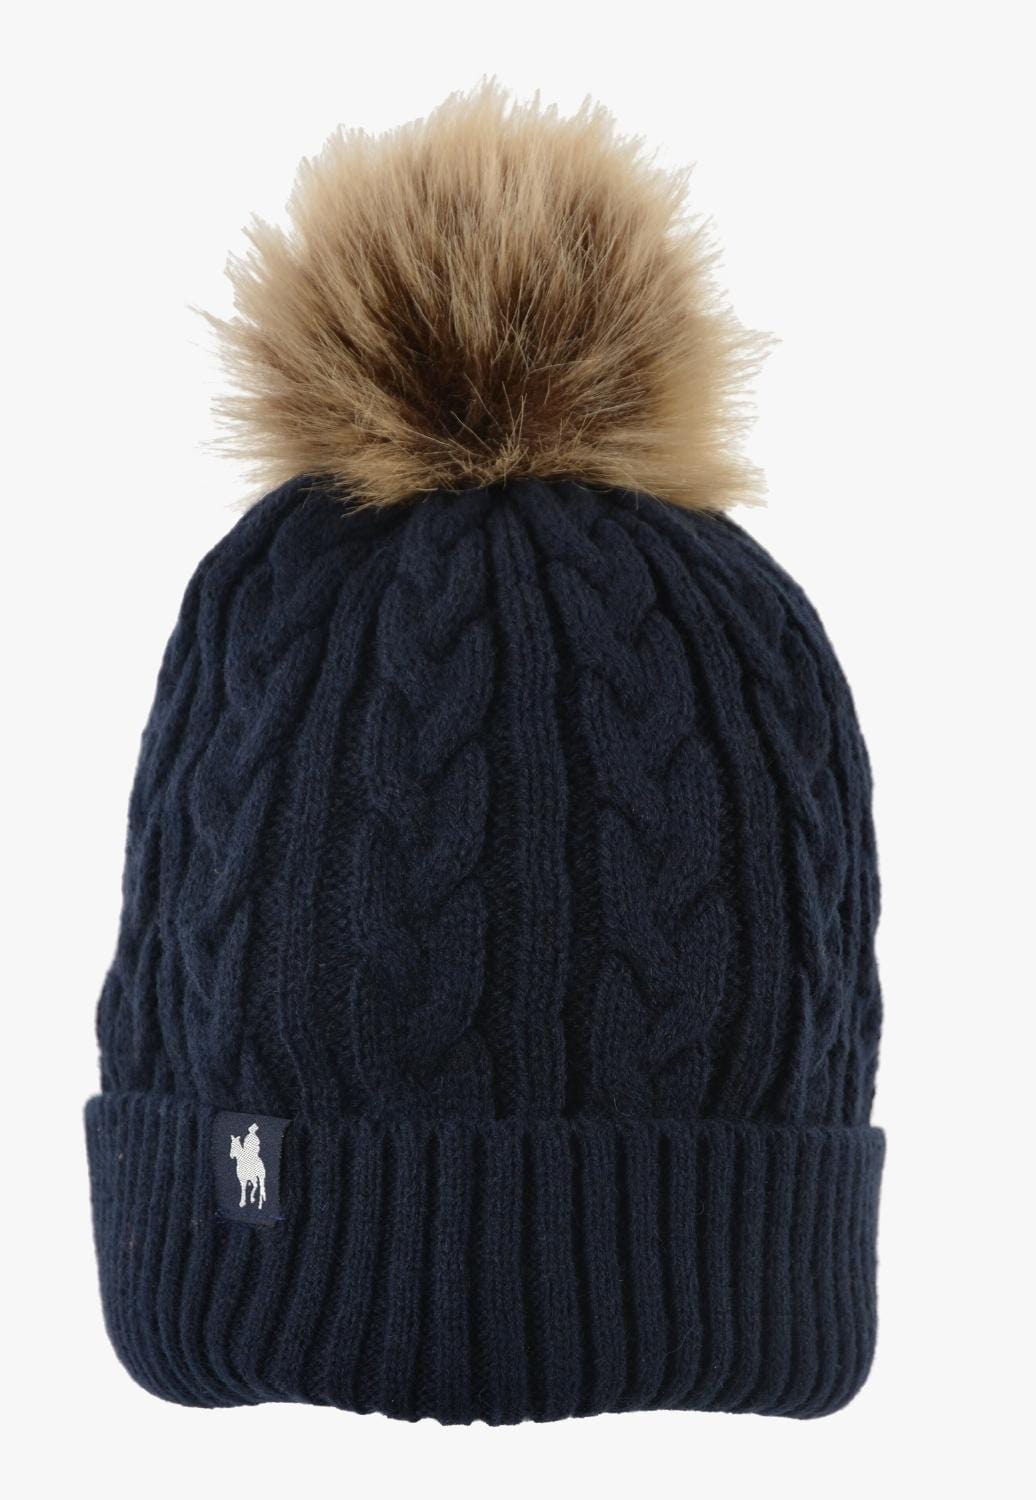 Thomas Cook HATS - Beanies Navy Thomas Cook Cable Knit Beanie